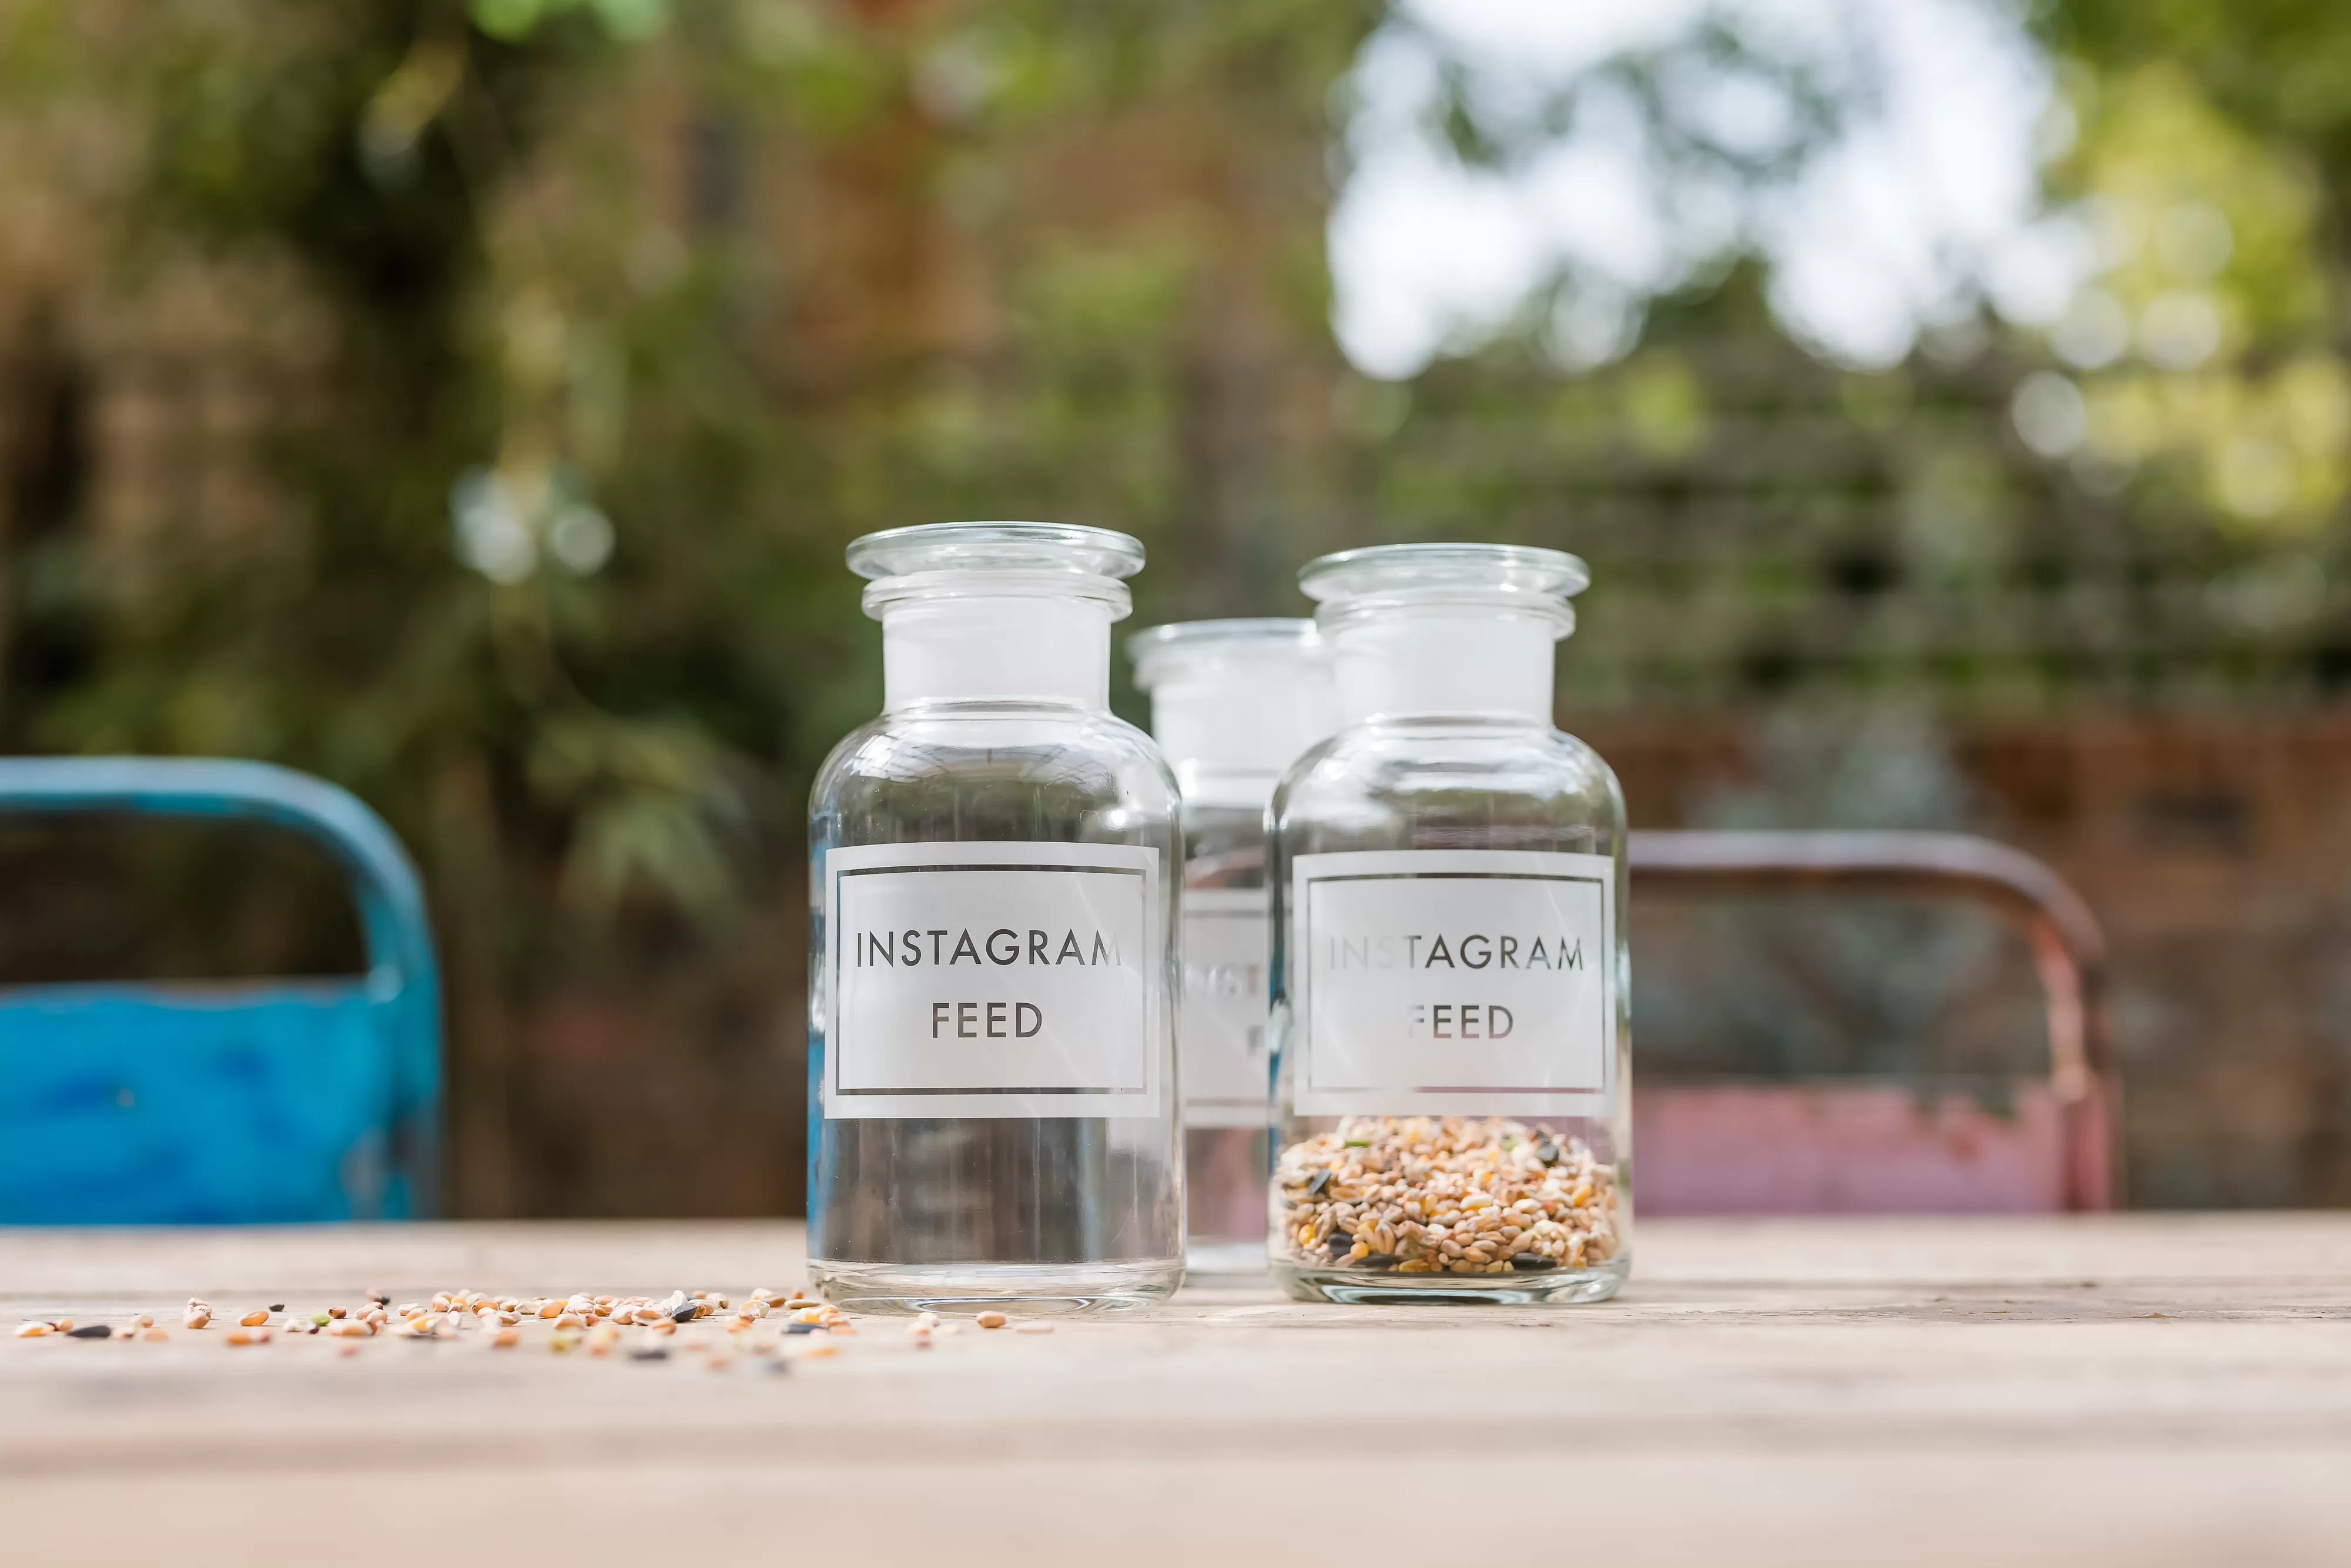 Glass jars with Instagram Feed engraving on a wooden table 